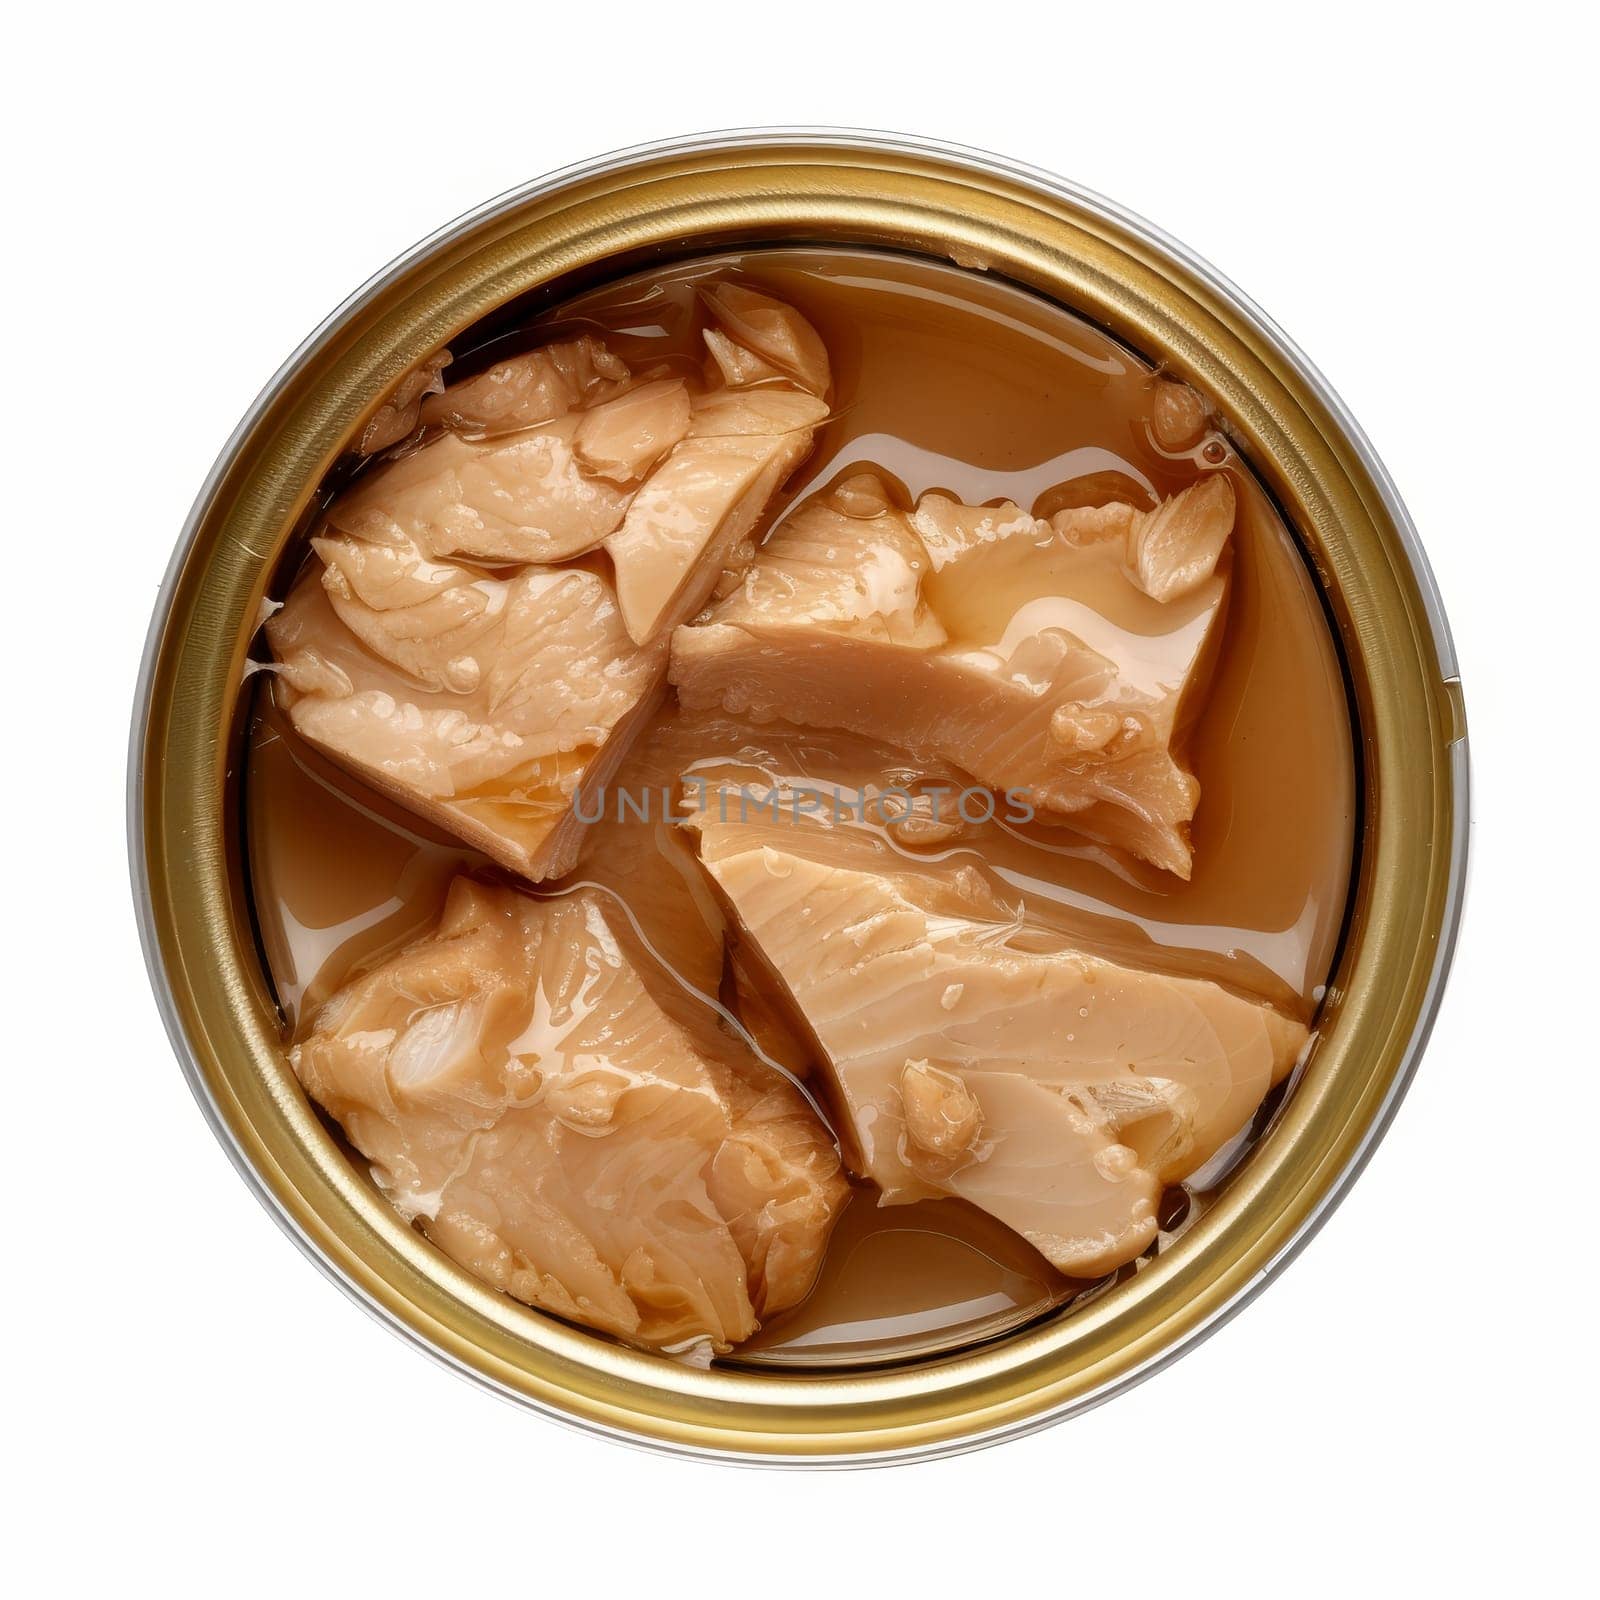 Overhead view of an open can showing chunks of tuna fish preserved in oil, set against a clean white background.. by sfinks